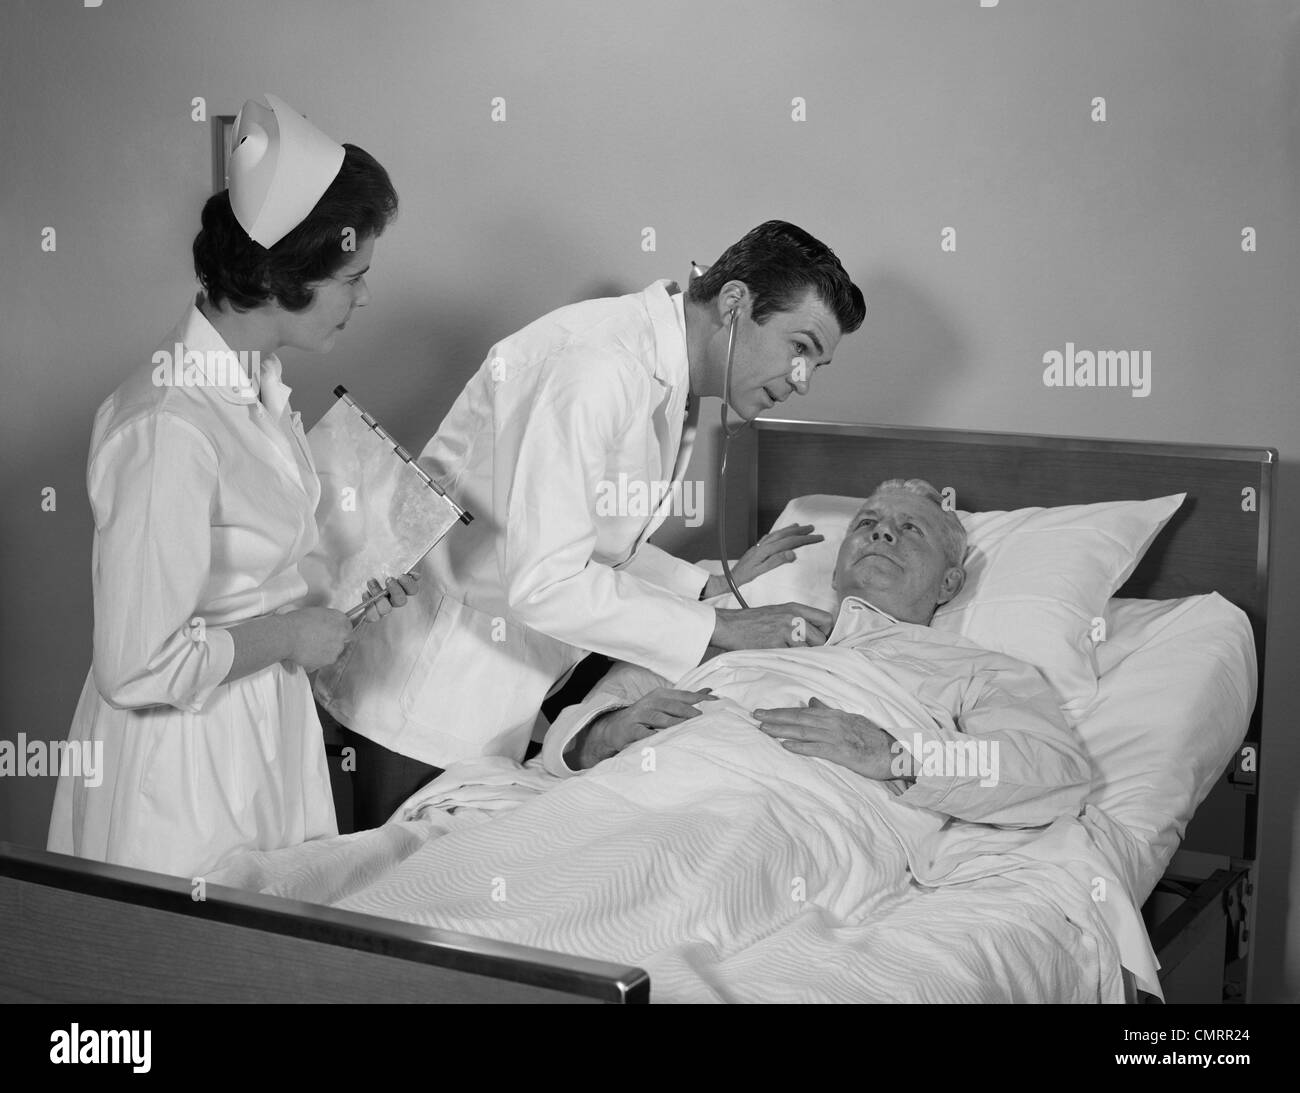 1960s DOCTOR AND NURSE CHECKING ON ELDERLY MALE PATIENT IN HOSPITAL BED Stock Photo